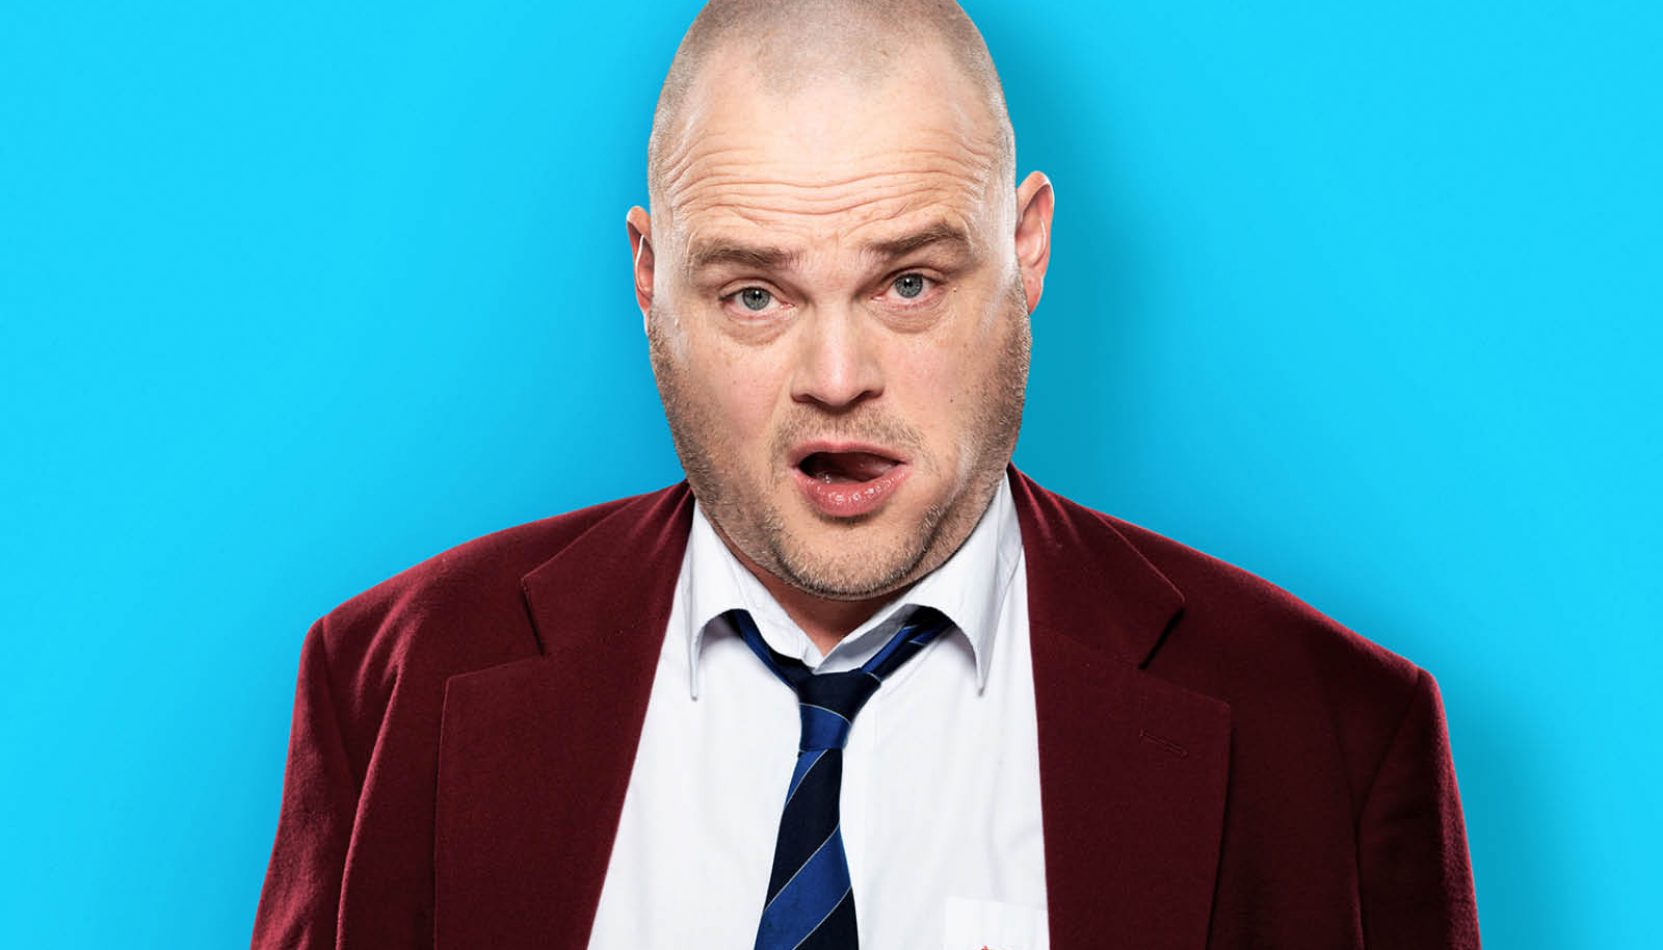 al murray, pub landlord, landlord of hope and glory, comedy, stand-up comedy, comic, rose theatre, kingston, surrey, whats on, comedy, going out, night out, guide to, guideto, guide to whats on, whats on in kingston